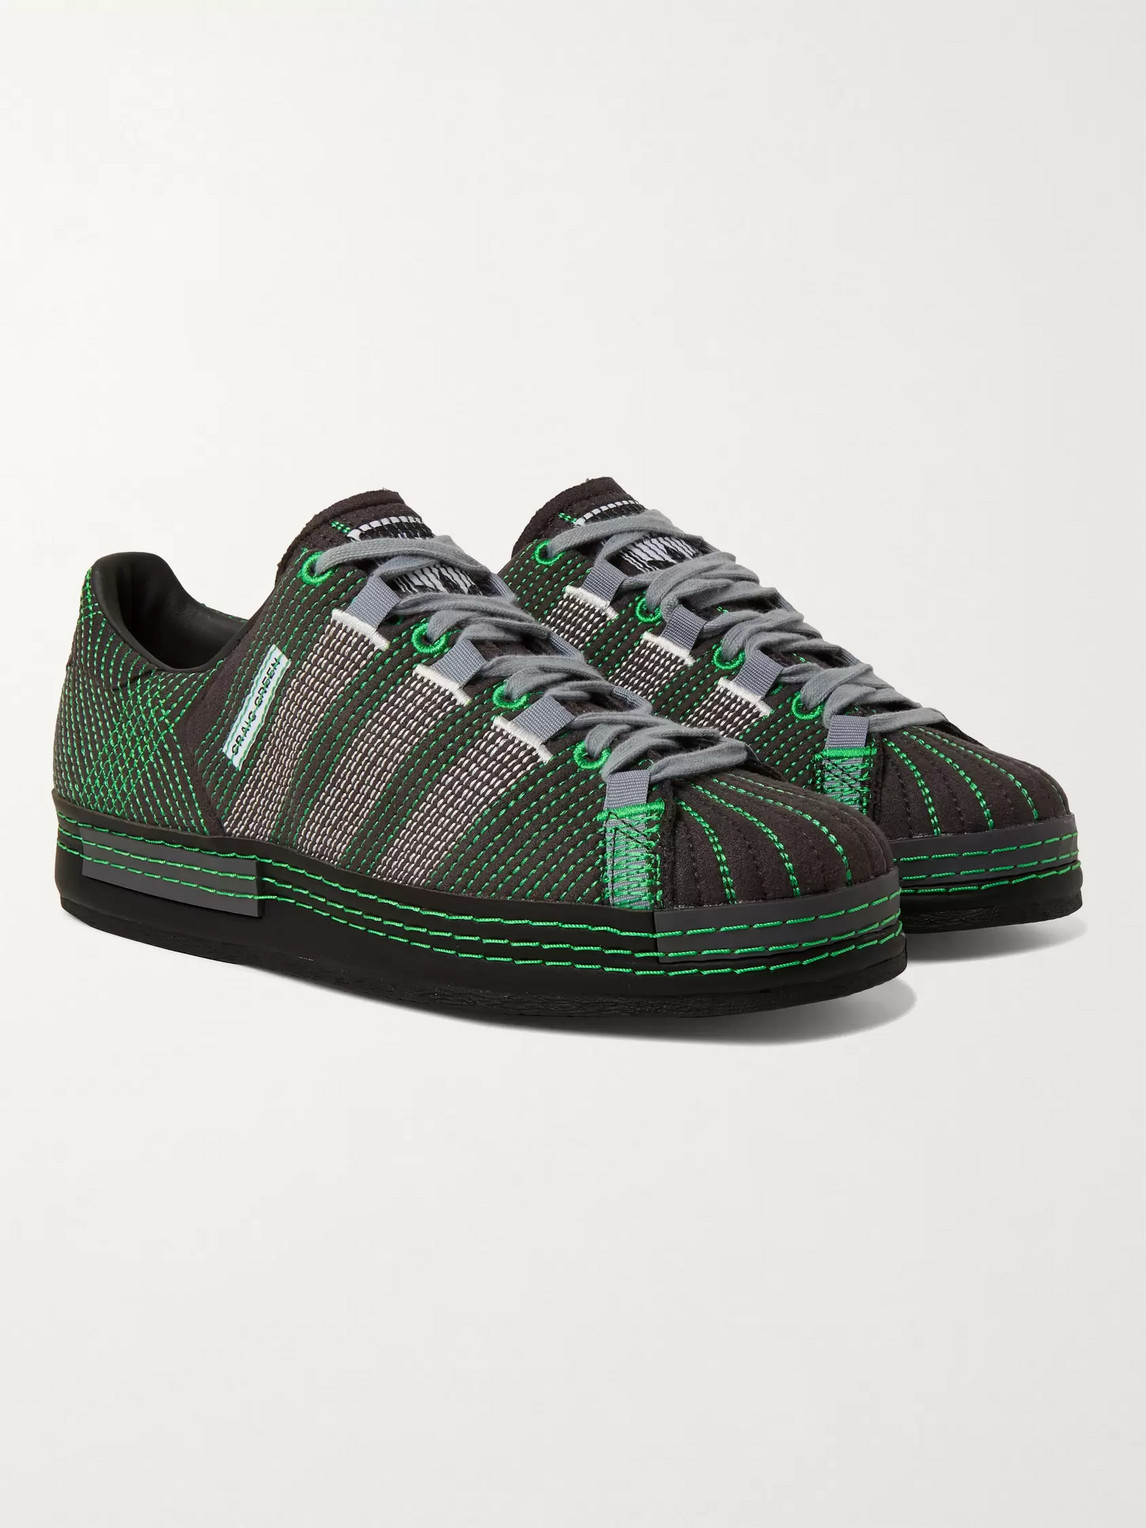 Adidas Consortium Craig Green Superstar Embroidered Faux Suede Sneakers In Black